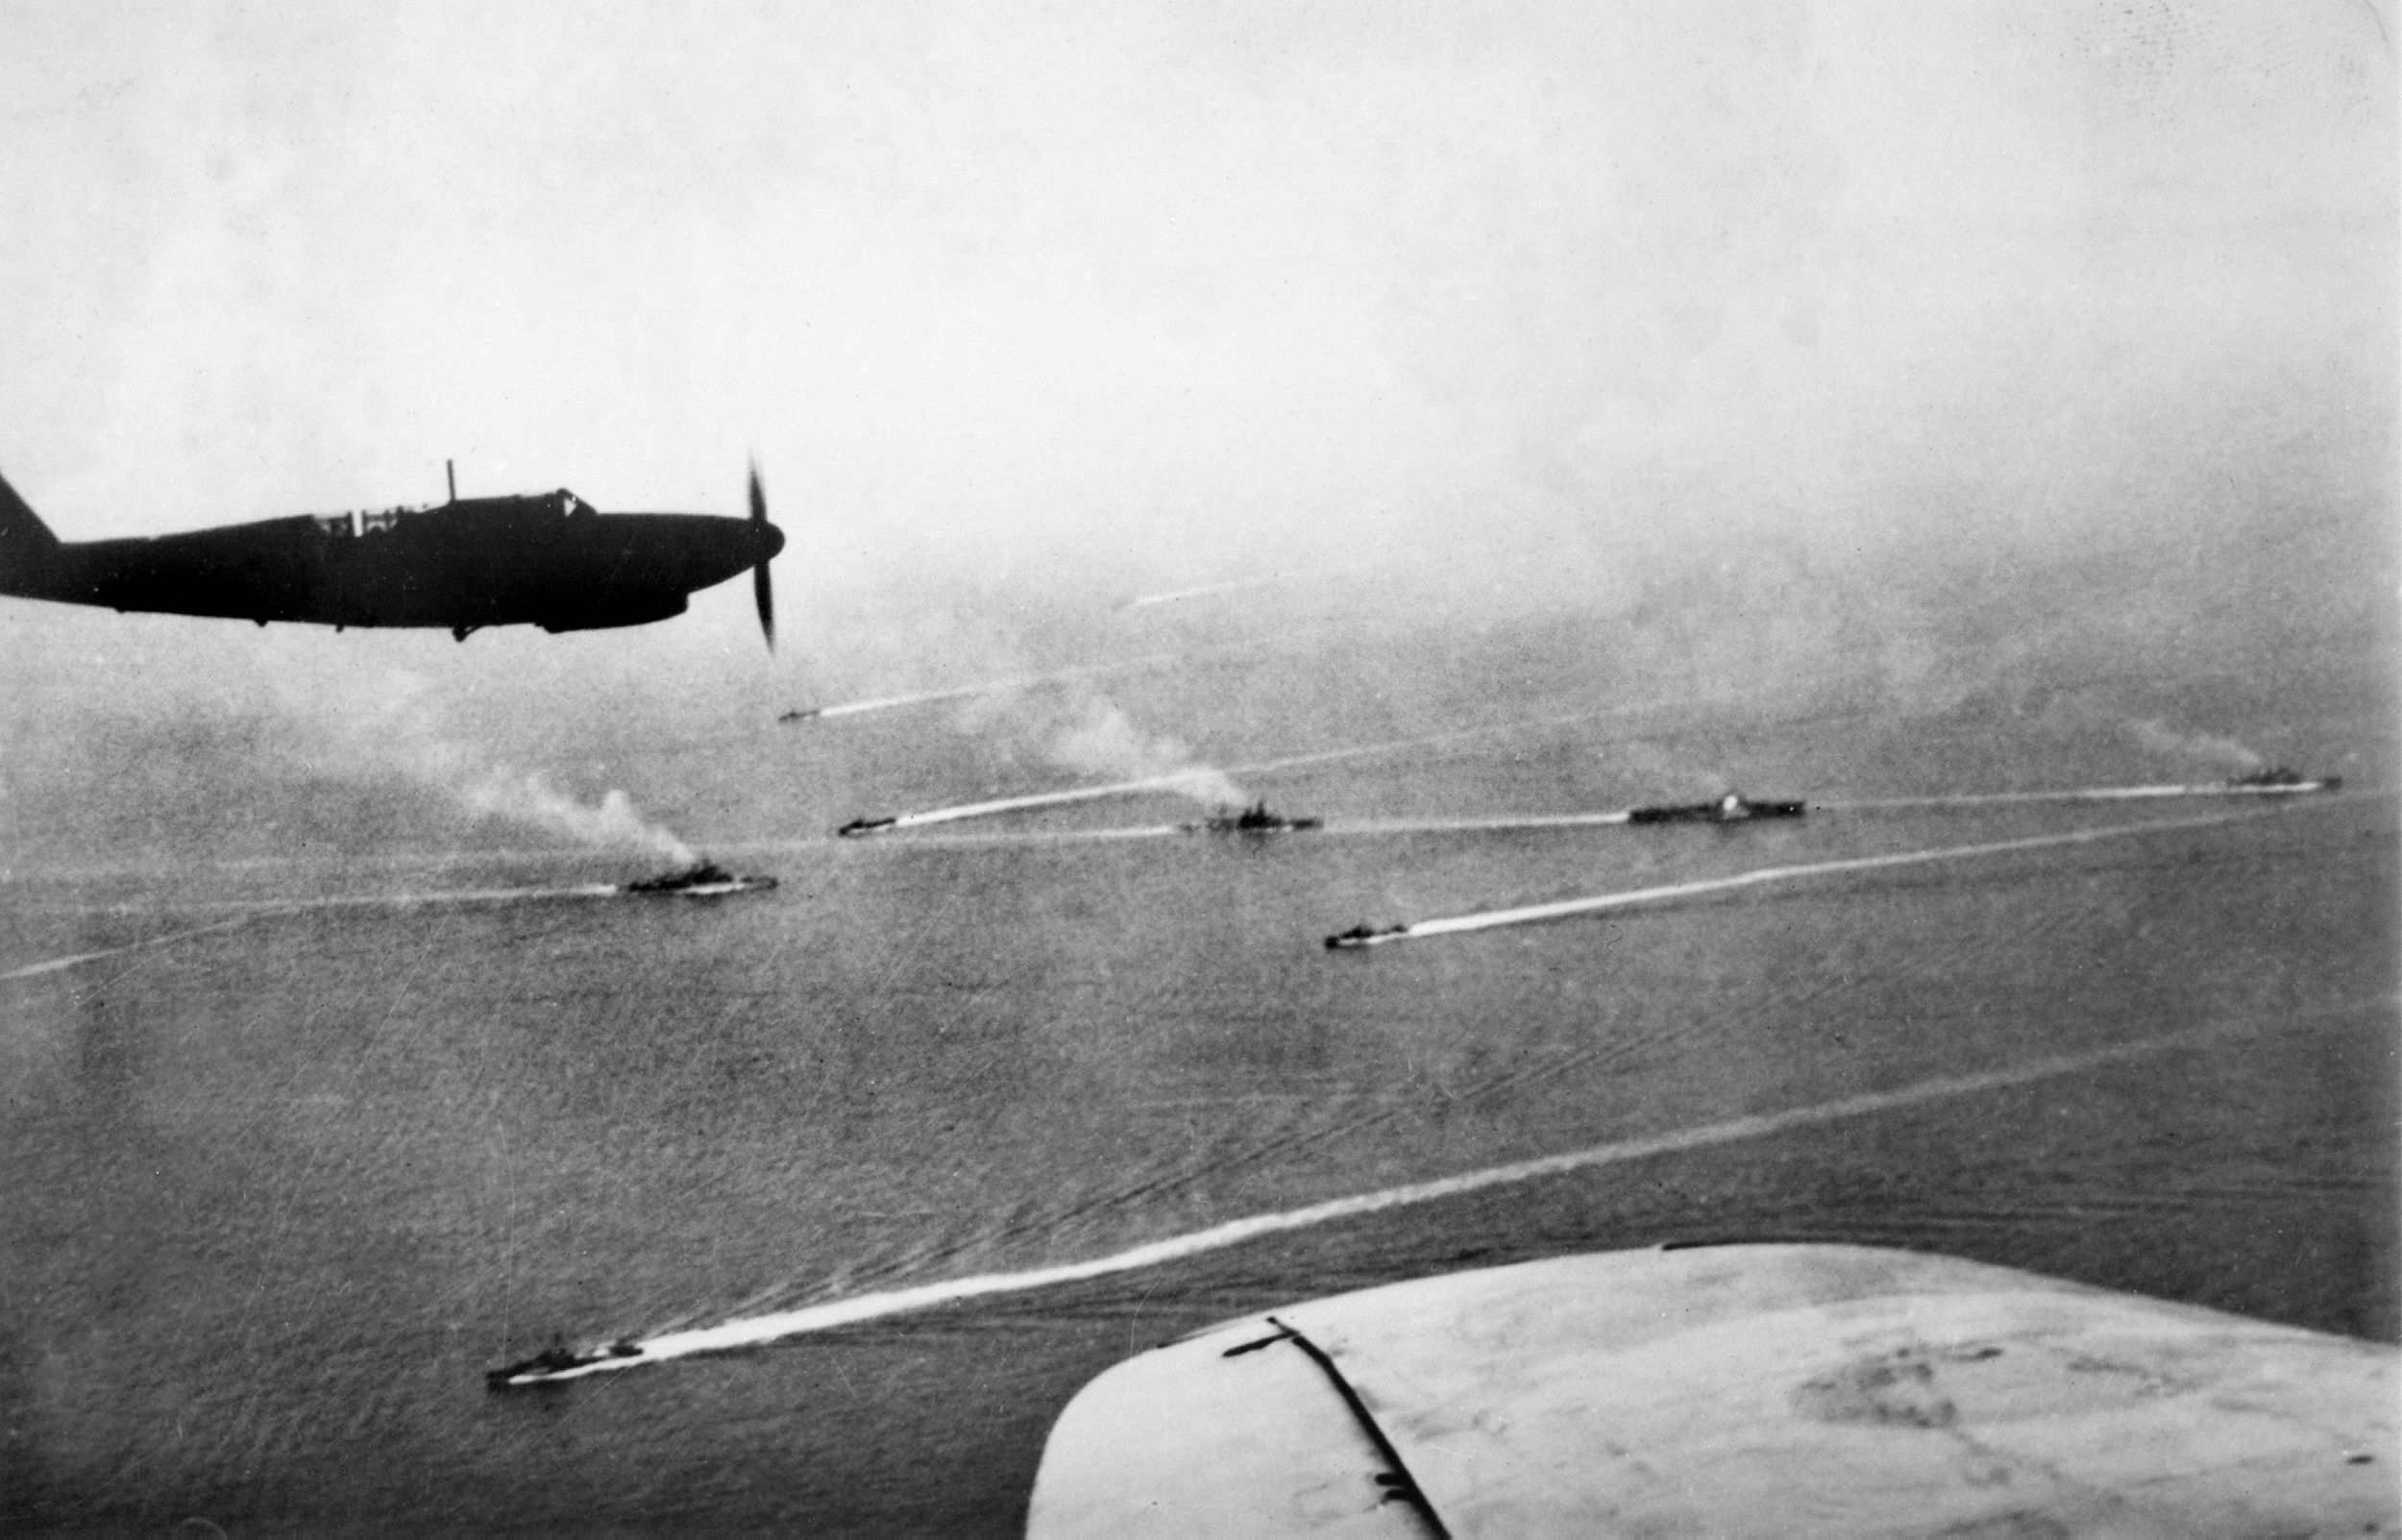 Photographed in the Ionian Sea at the time of the Battle of Cape Matapan, British warships are seen from the air. The plane in the photo is a British Fairey Fulmar.